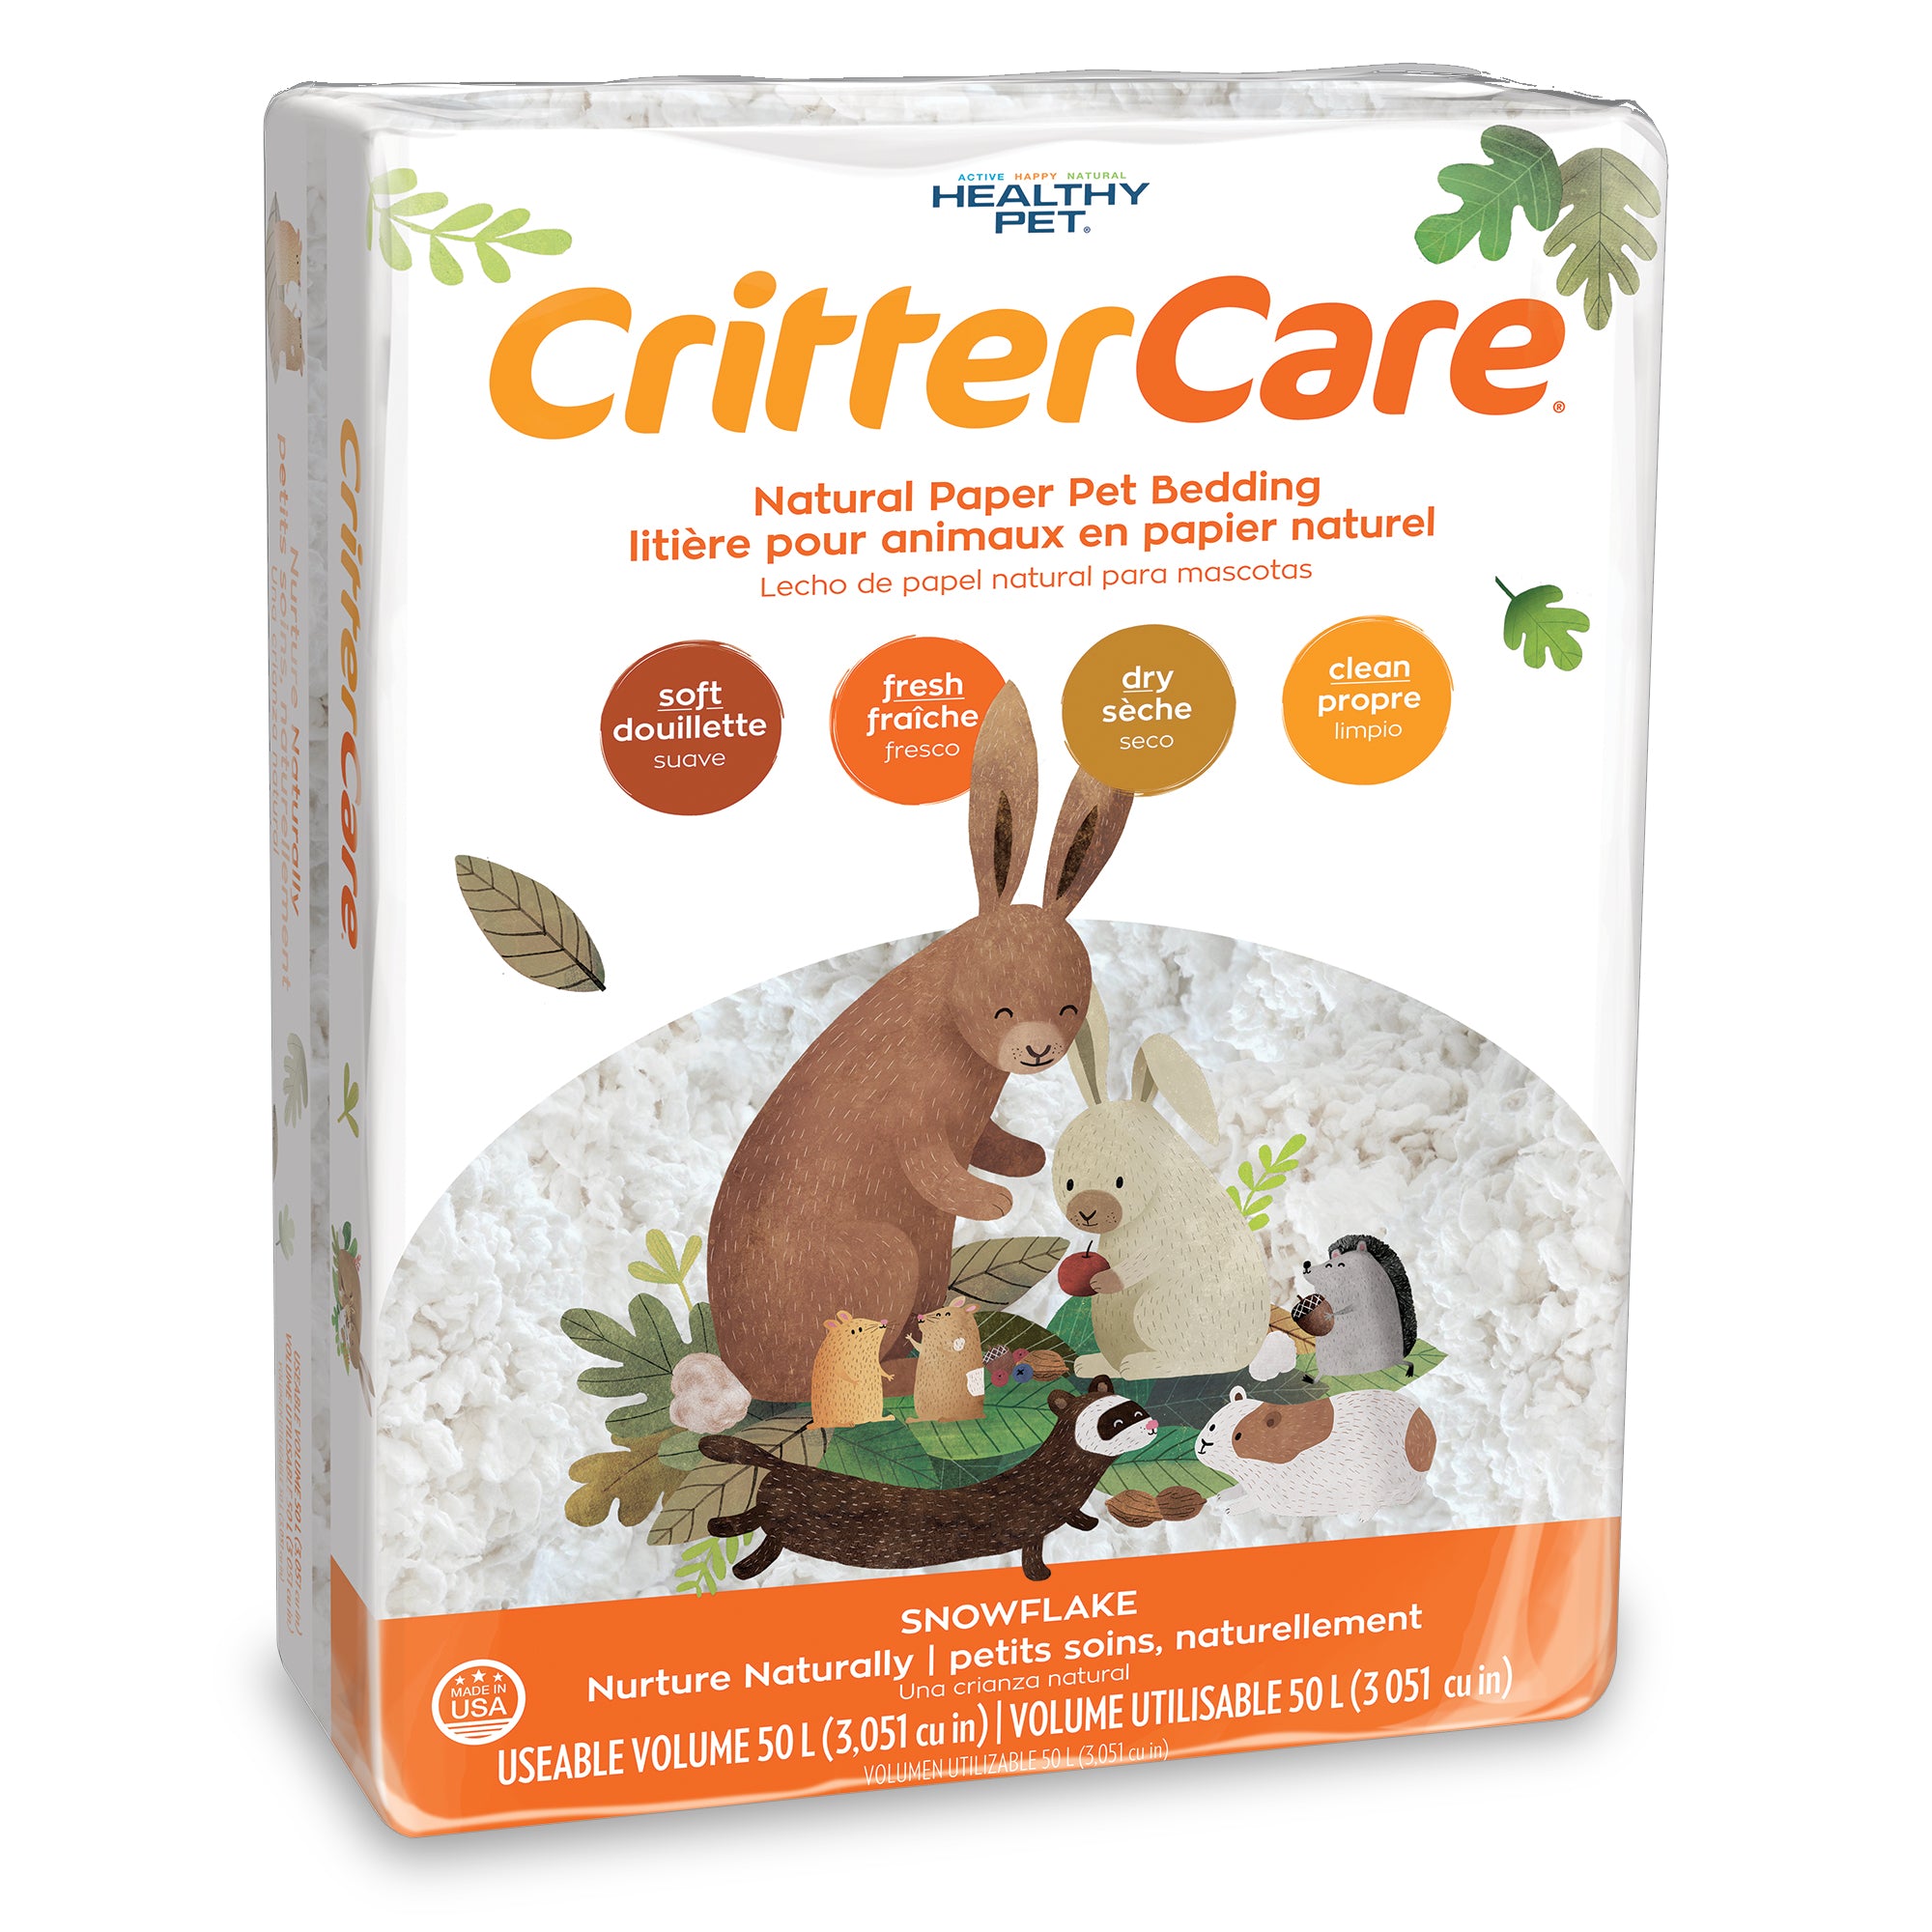 Natural Paper Pet Bedding for Small Pets